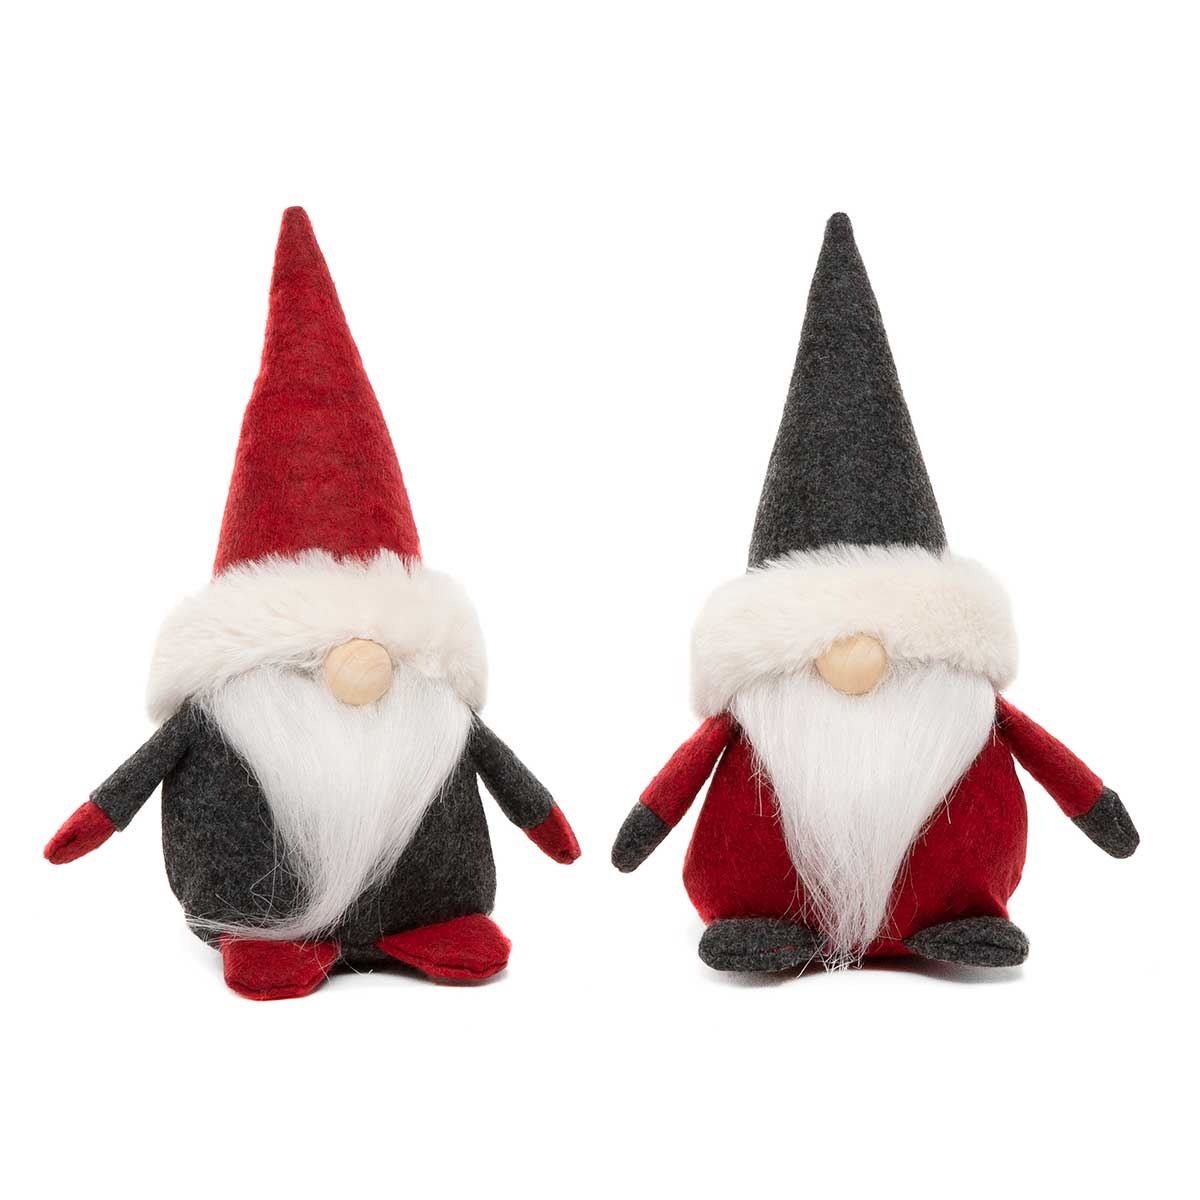 OLSEN BROTHERS GNOME RED/GREY 2 AST SMALL